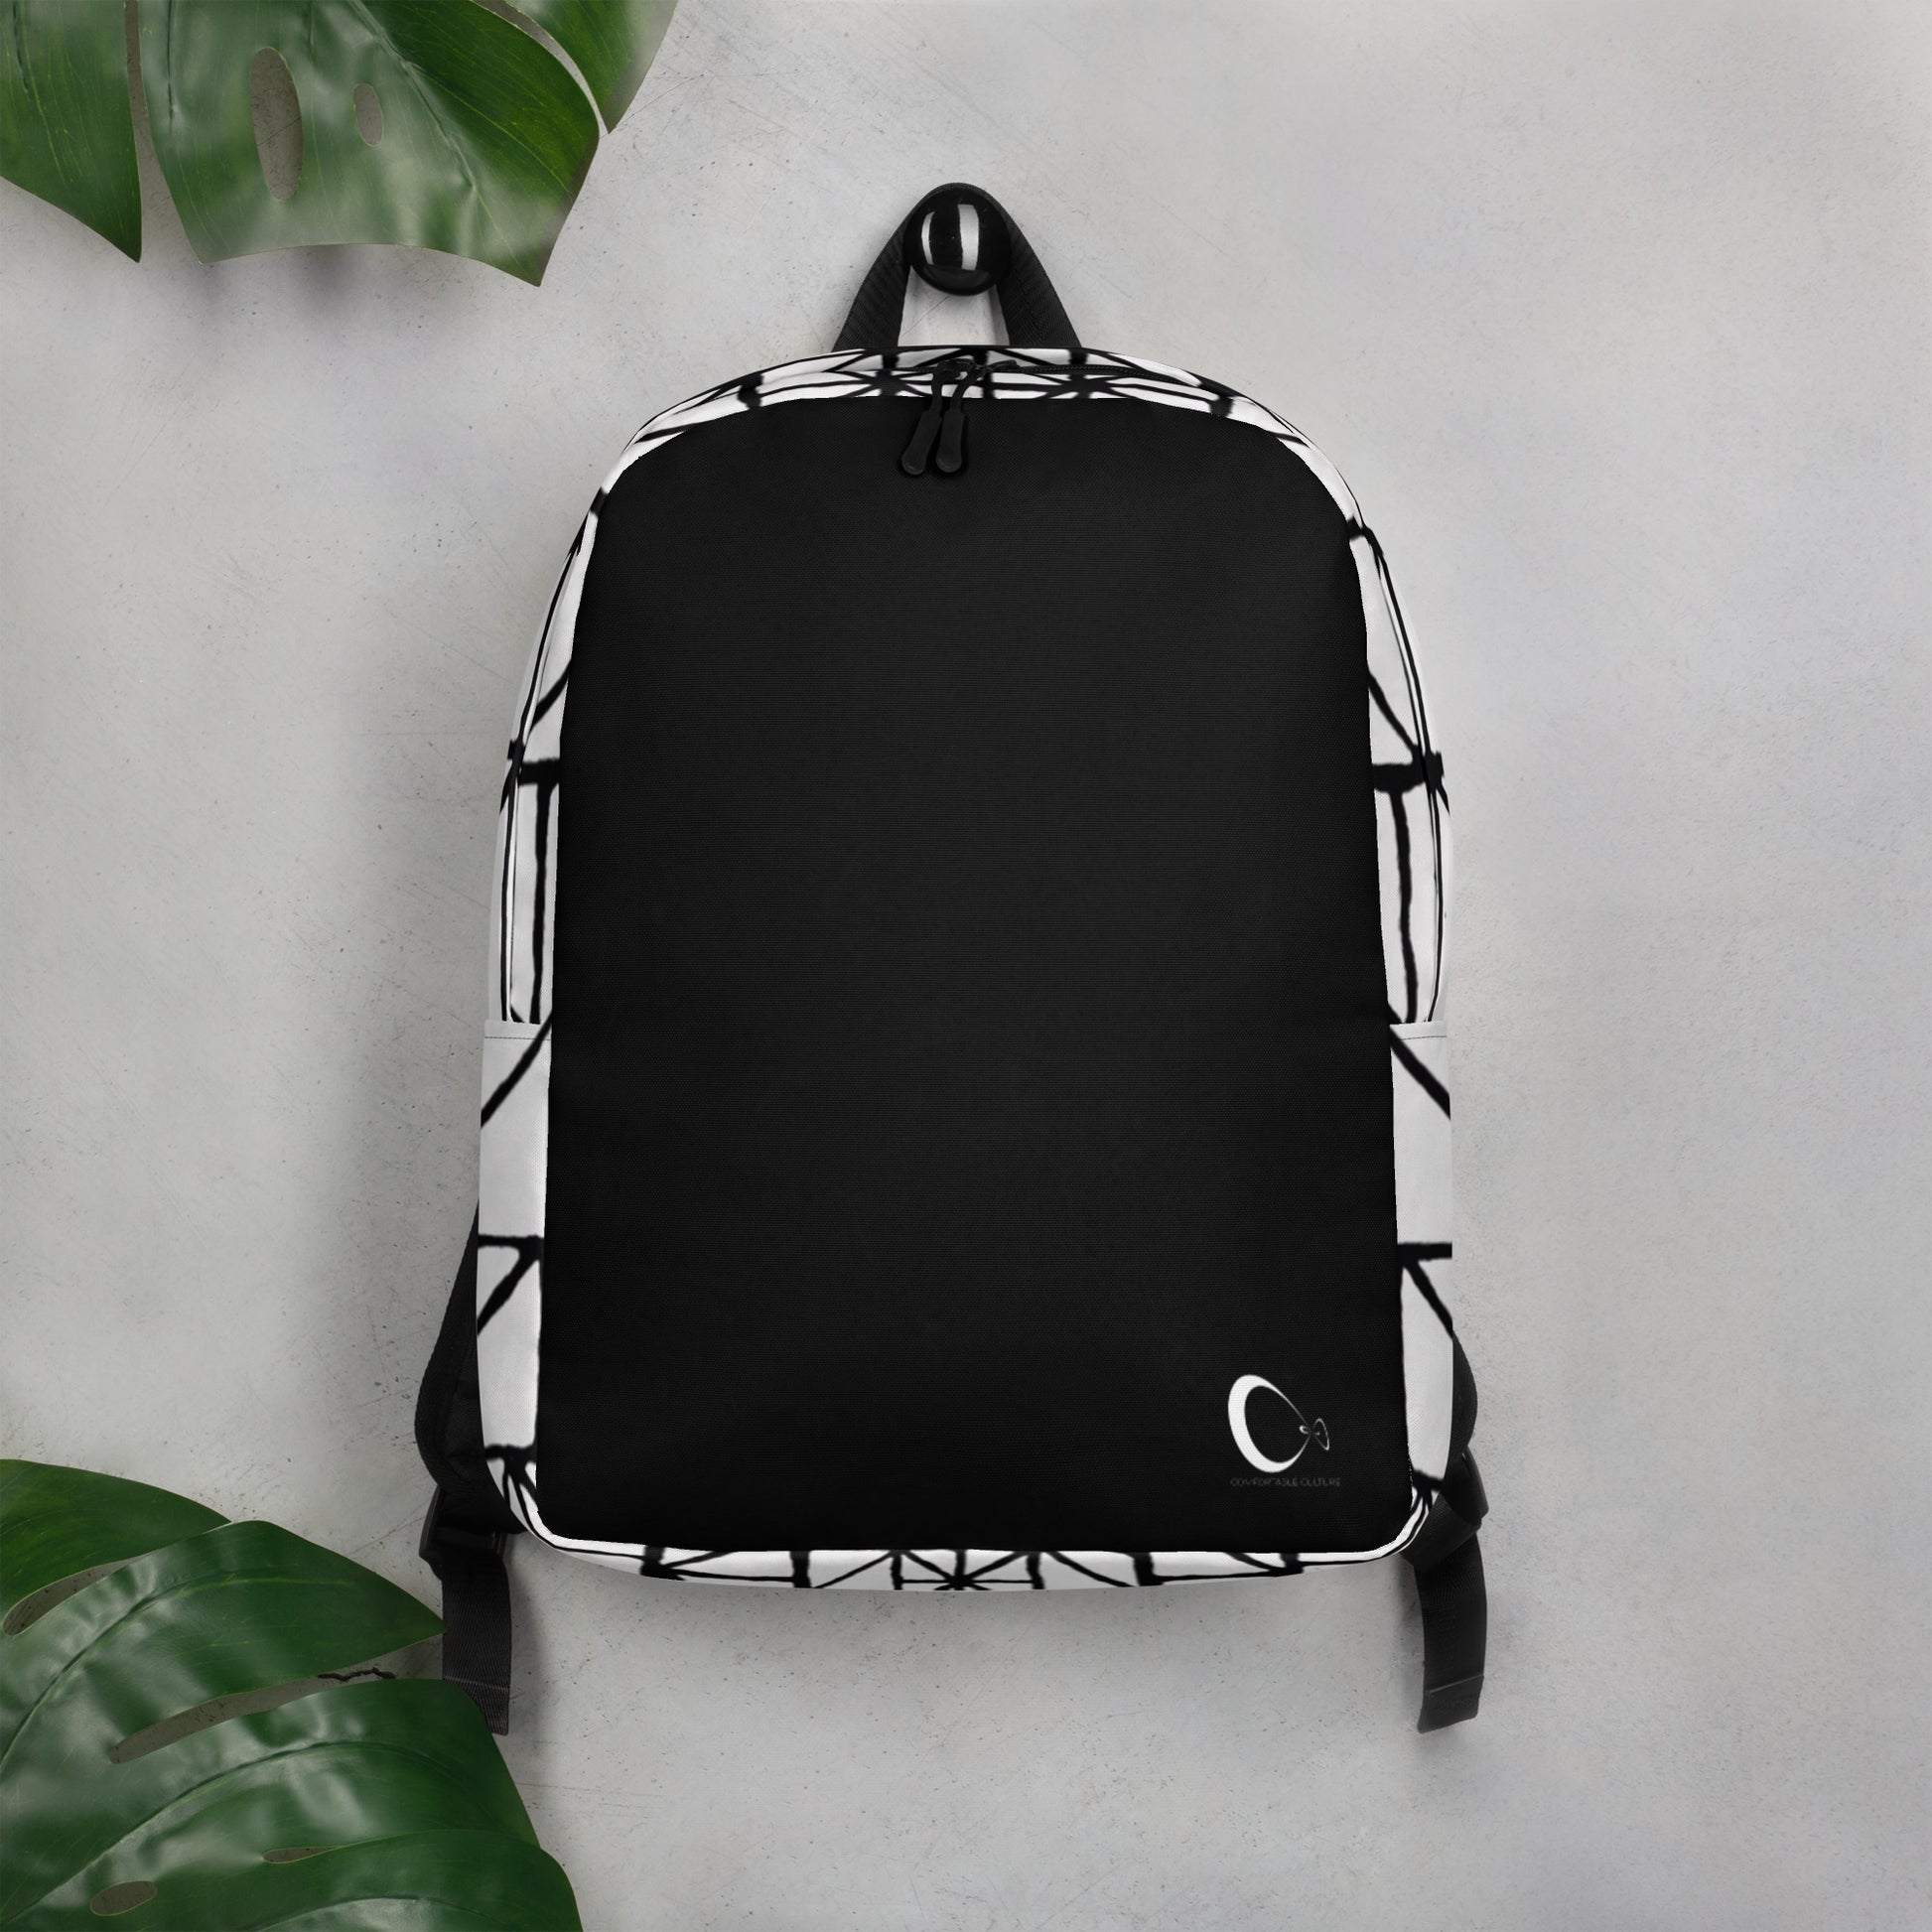 Tribal Print Black and White Minimalist Backpack | Modern & Minimalist Water-Resistant Laptop Backpack with Hidden Pocket | - Comfortable Culture - Backpacks - Comfortable Culture